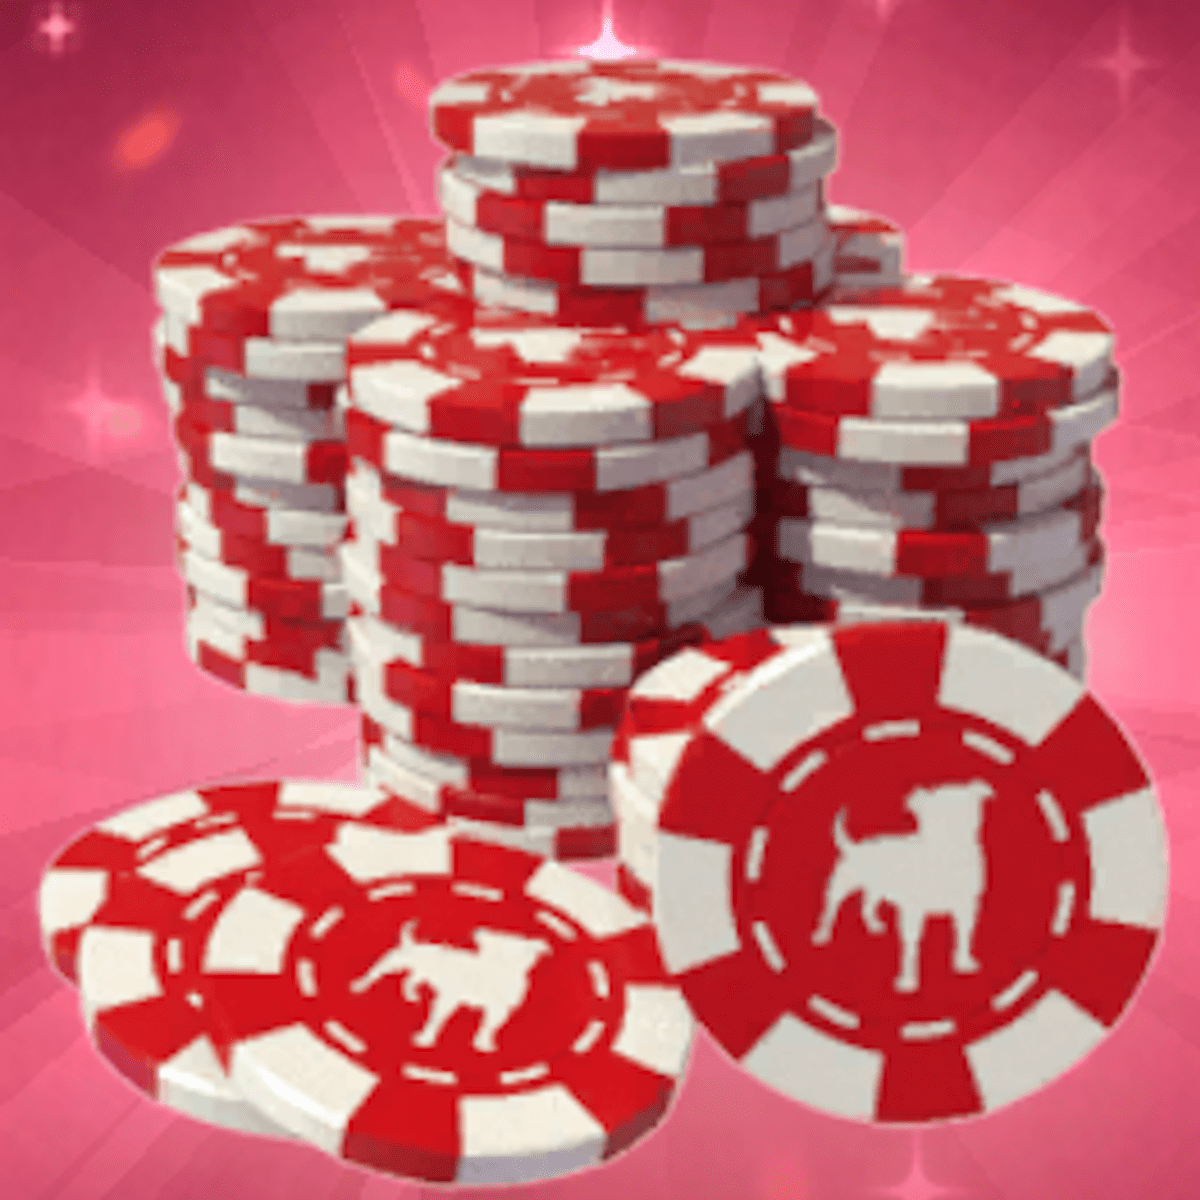 How to Get Free Chips in "Zynga Poker" -